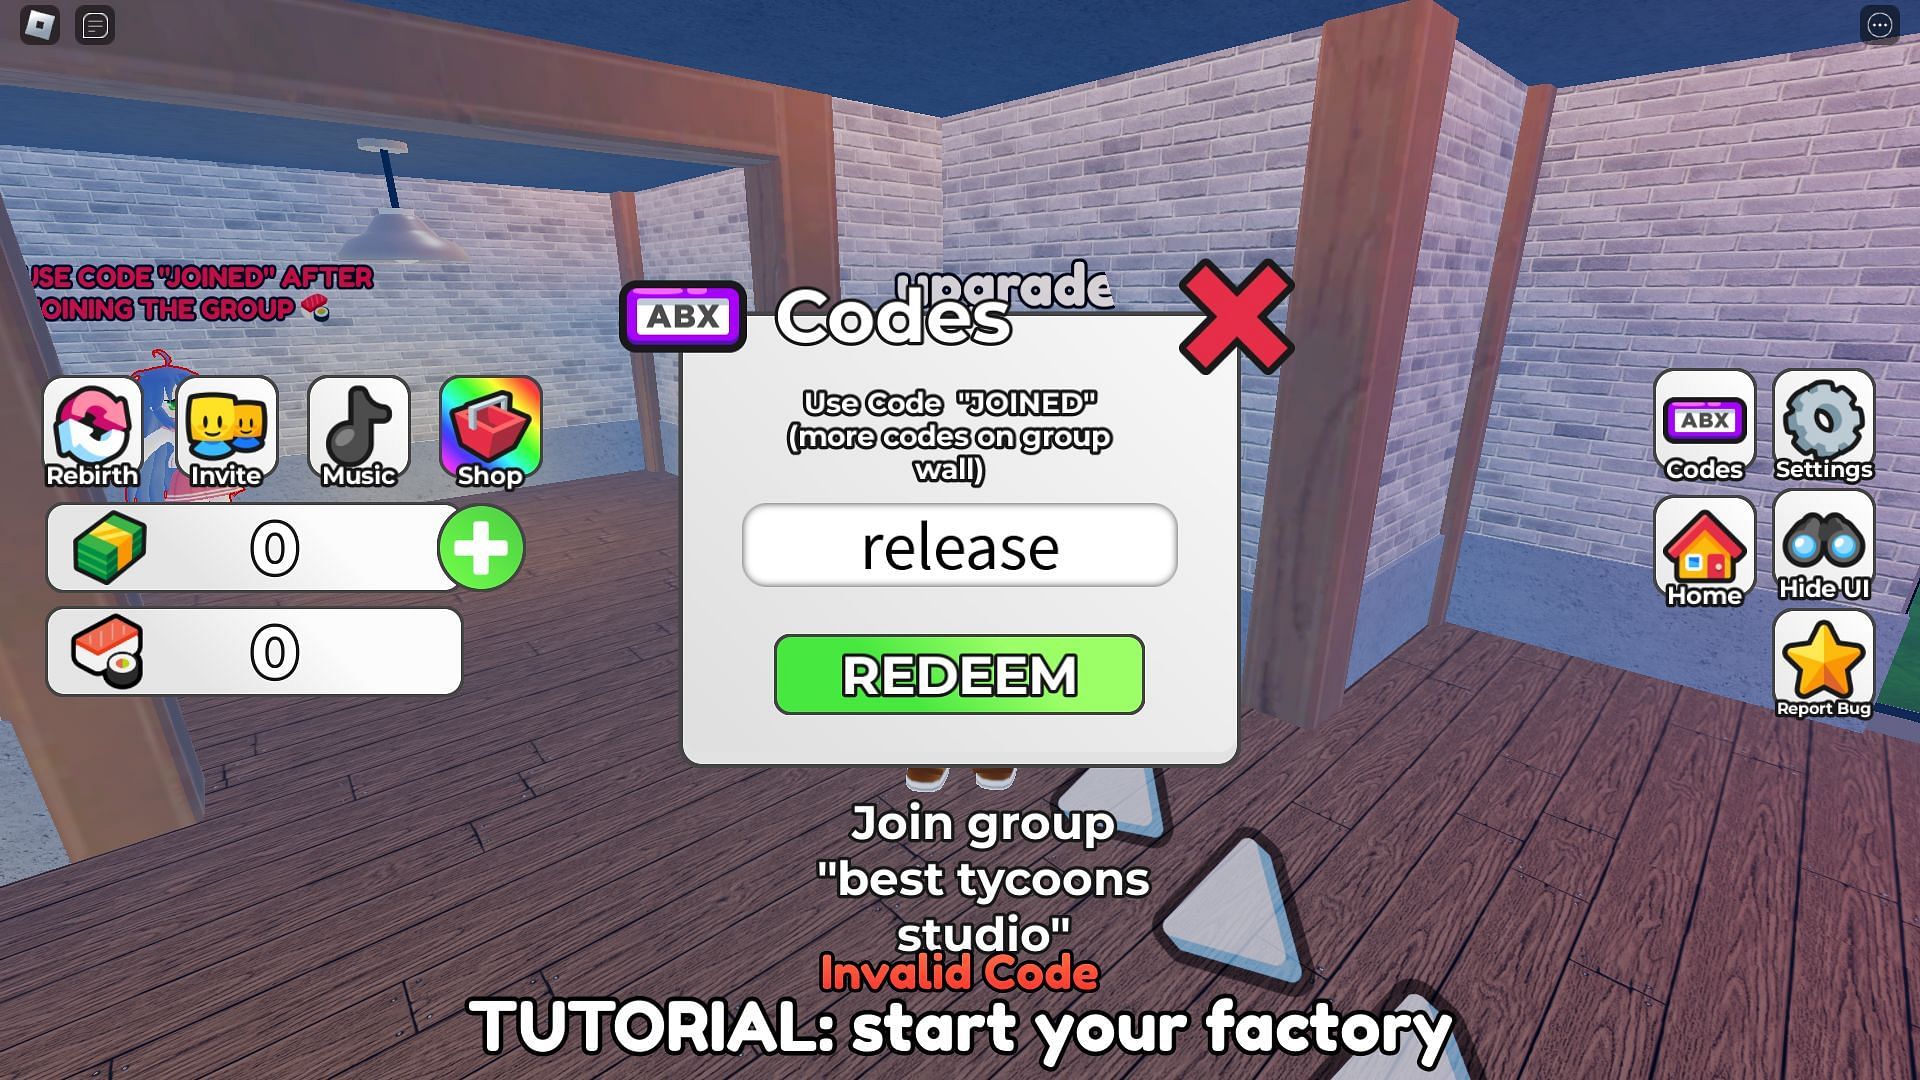 Troubleshooting codes for Make Sushi and Prove Dad Wrong (Image via Roblox)